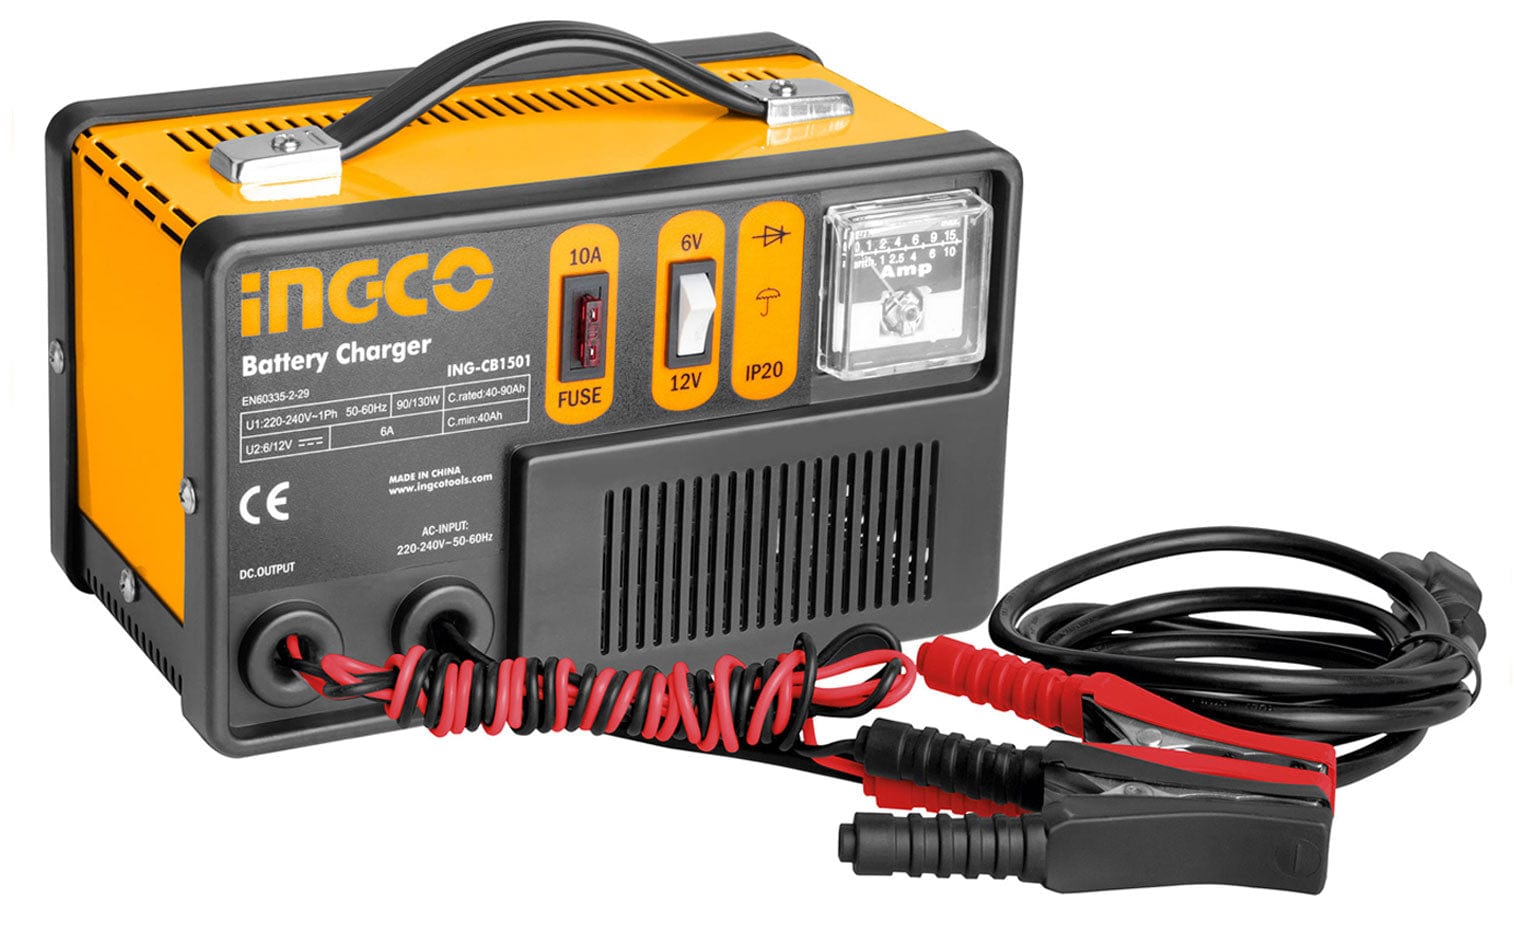 Ingco Battery Charger - ING-CB1501 | Supply Master Accra, Ghana Welding Machine & Accessories Buy Tools hardware Building materials